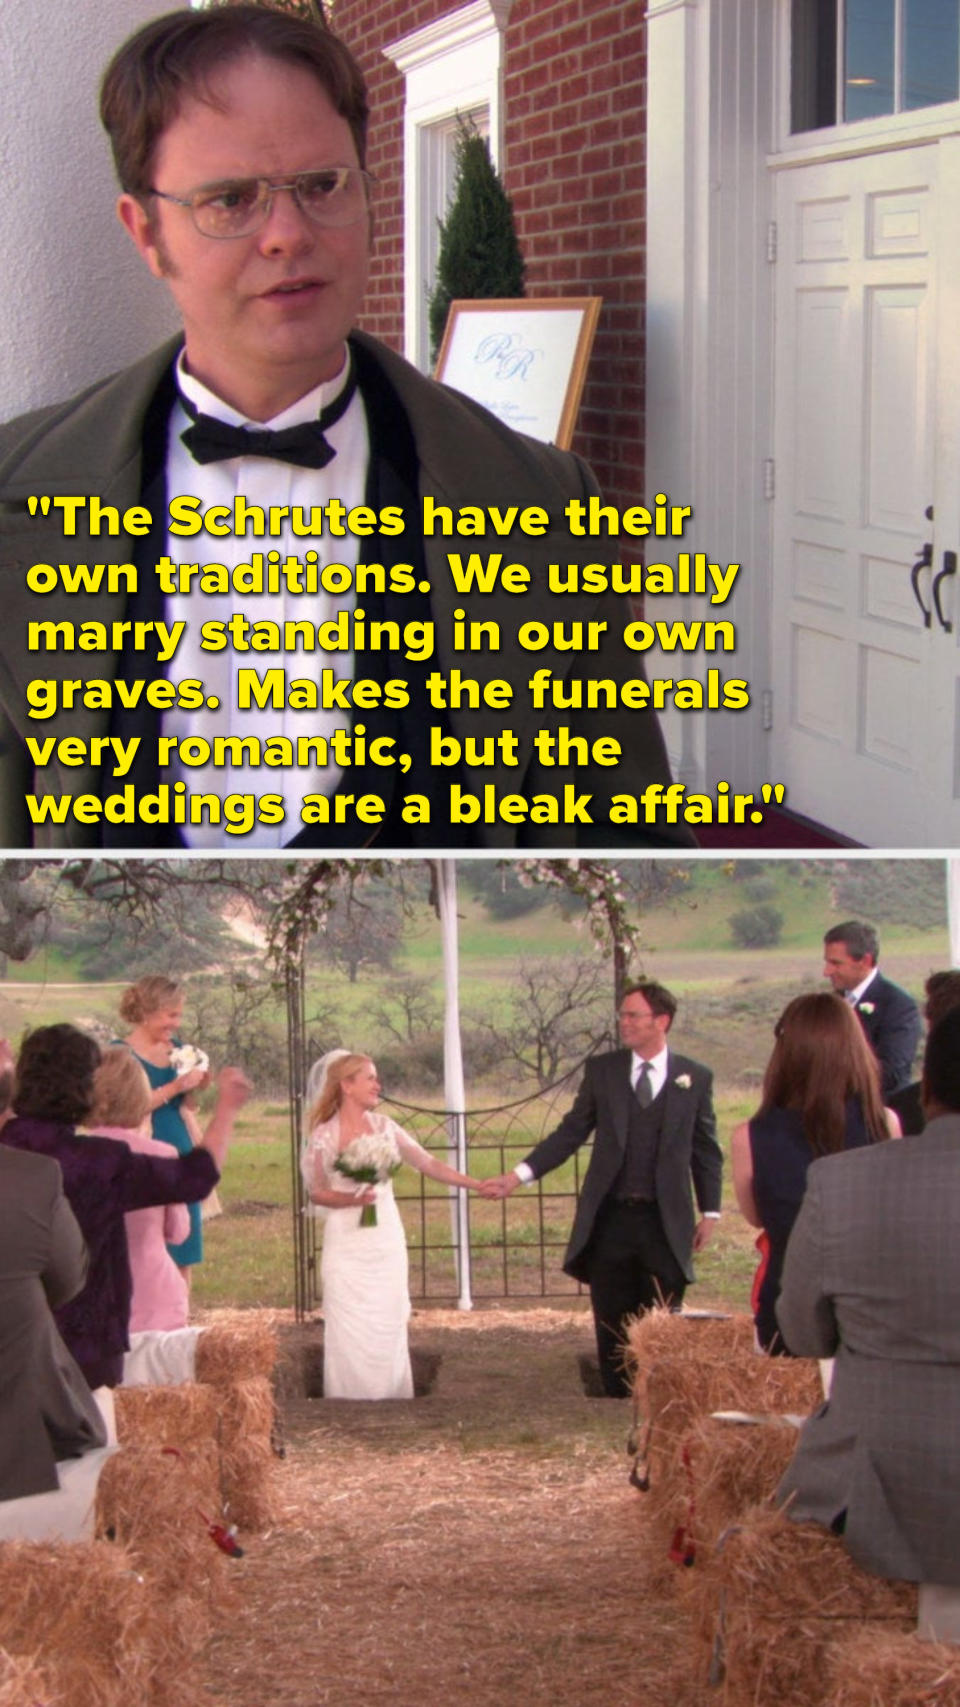 Dwight says, "The Schrutes have their own traditions, we usually marry standing in our own graves, makes the funerals very romantic, but the weddings are a bleak affair," and then we see that's how Angela and Dwight get married